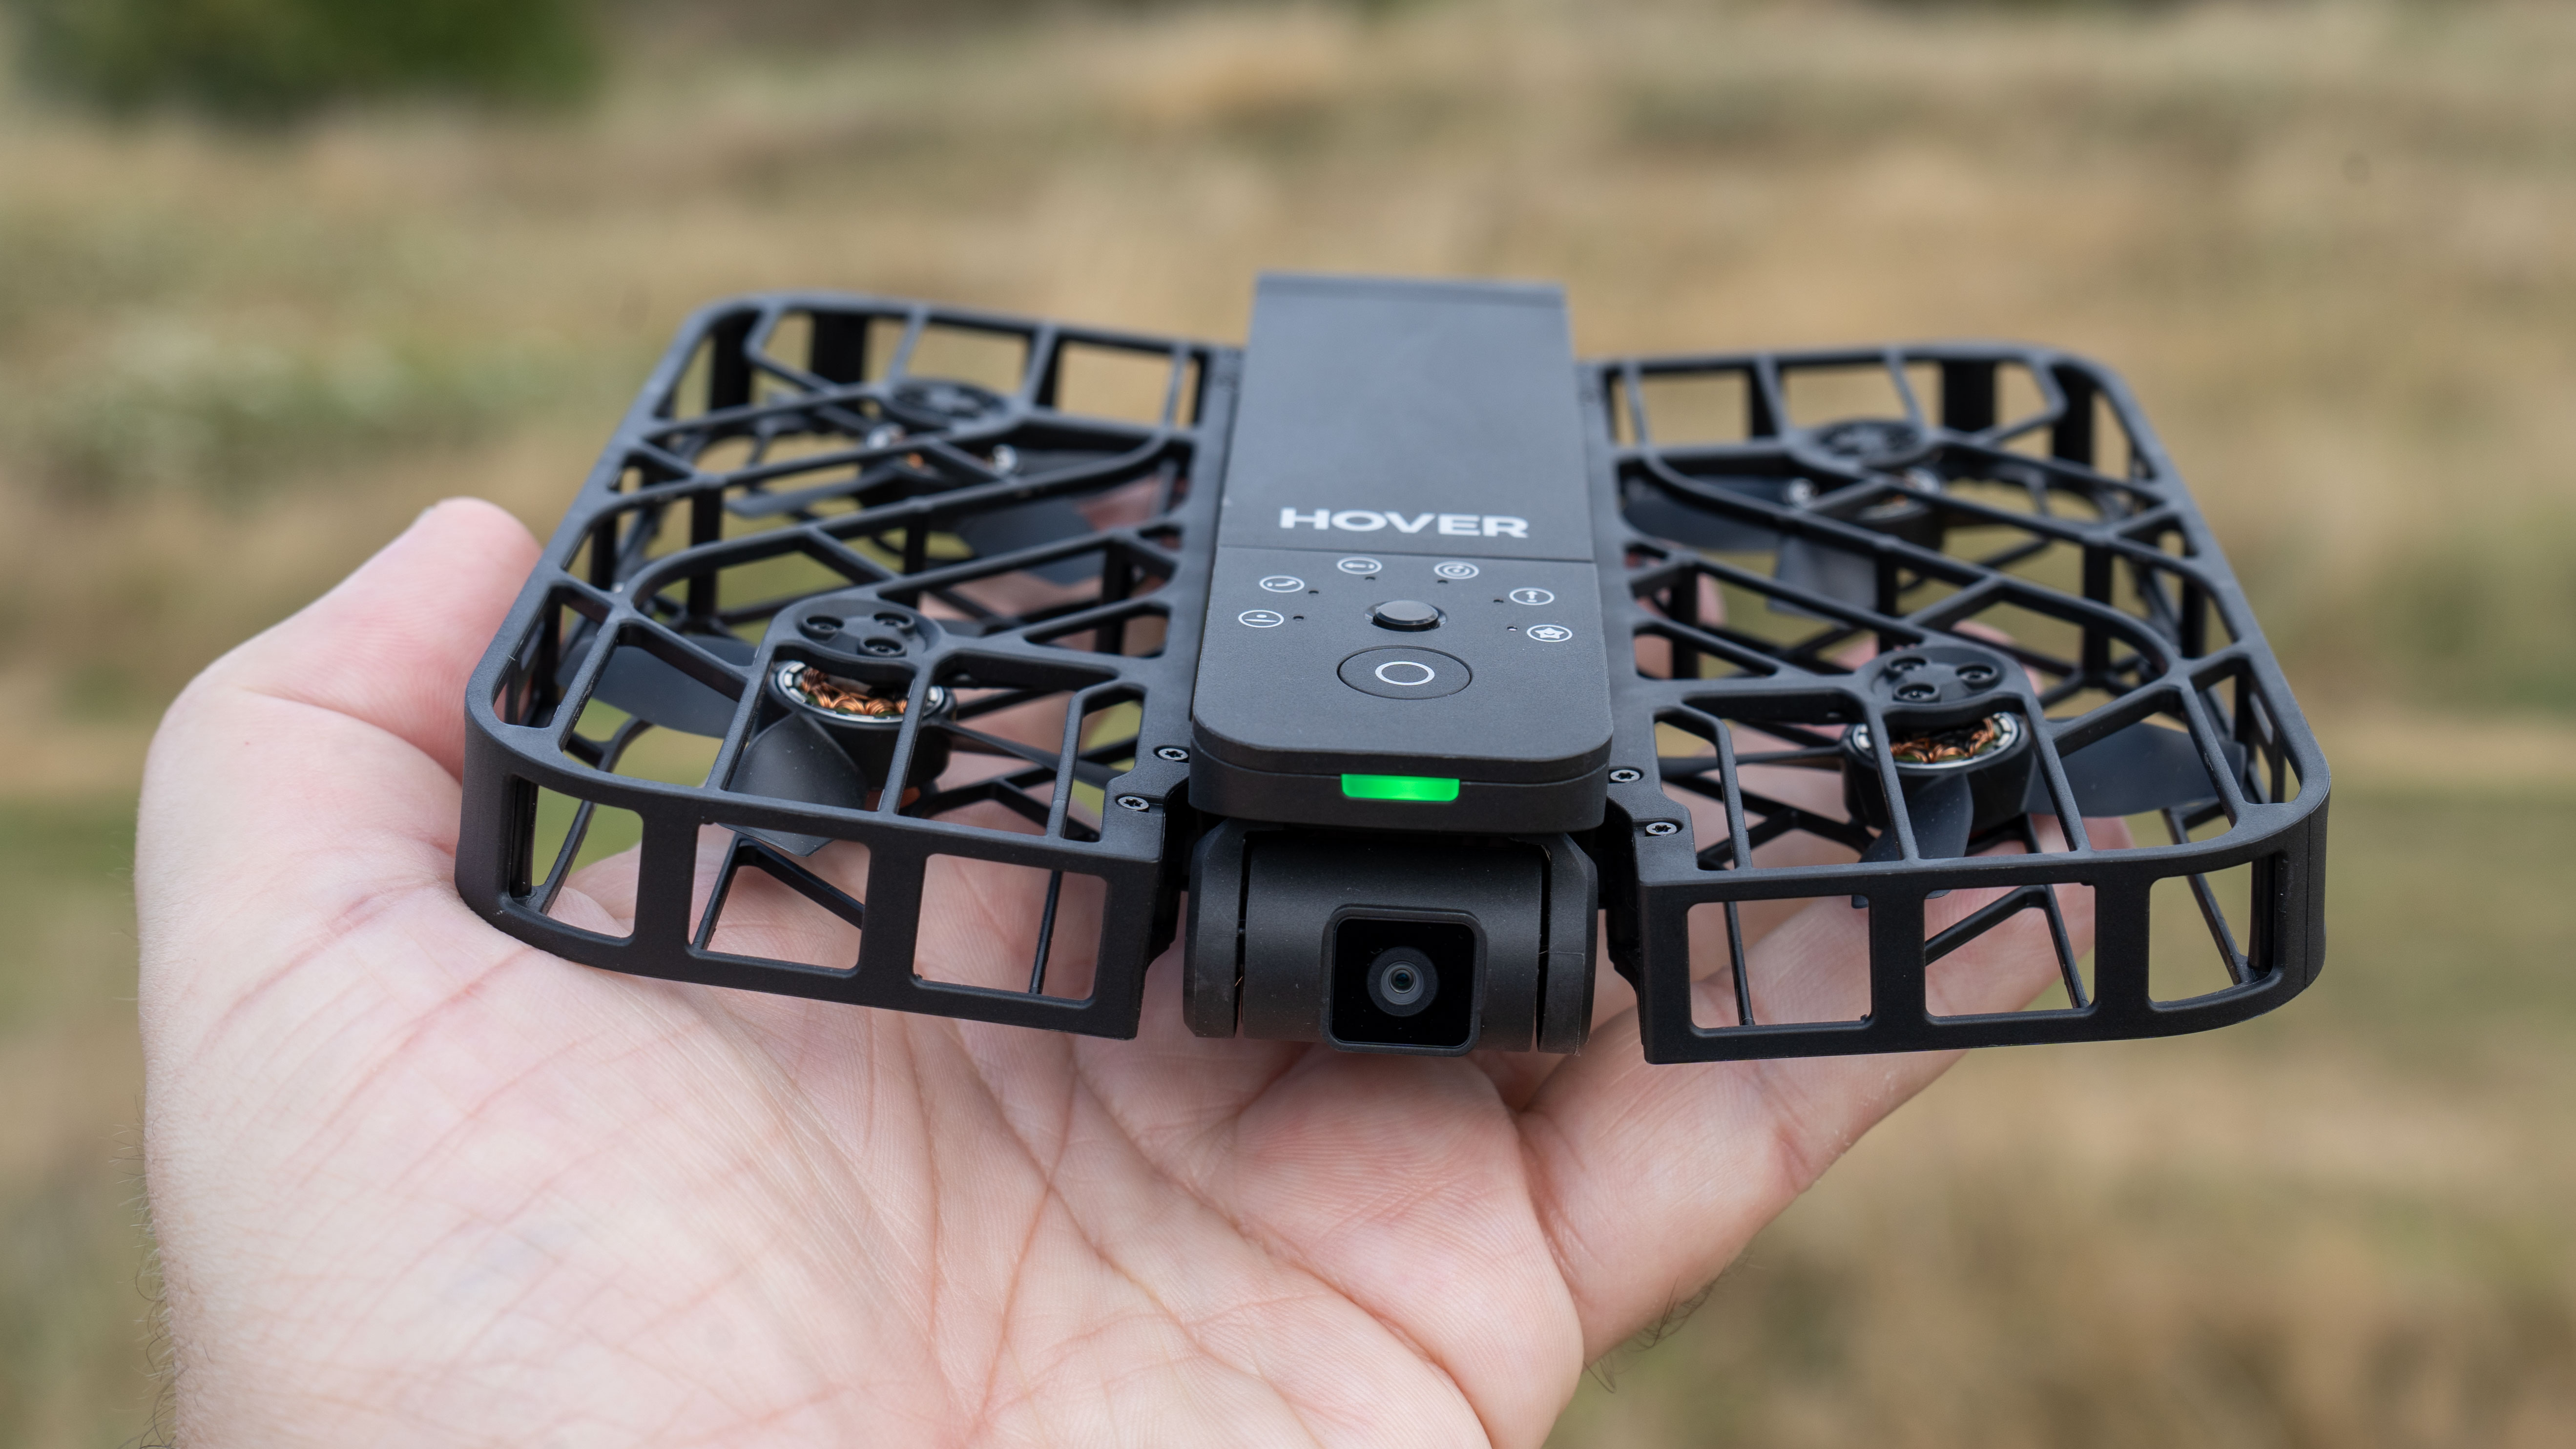 Self-Stabilizing Photography Drones : HOVERAir X1 Self-Flying Camera